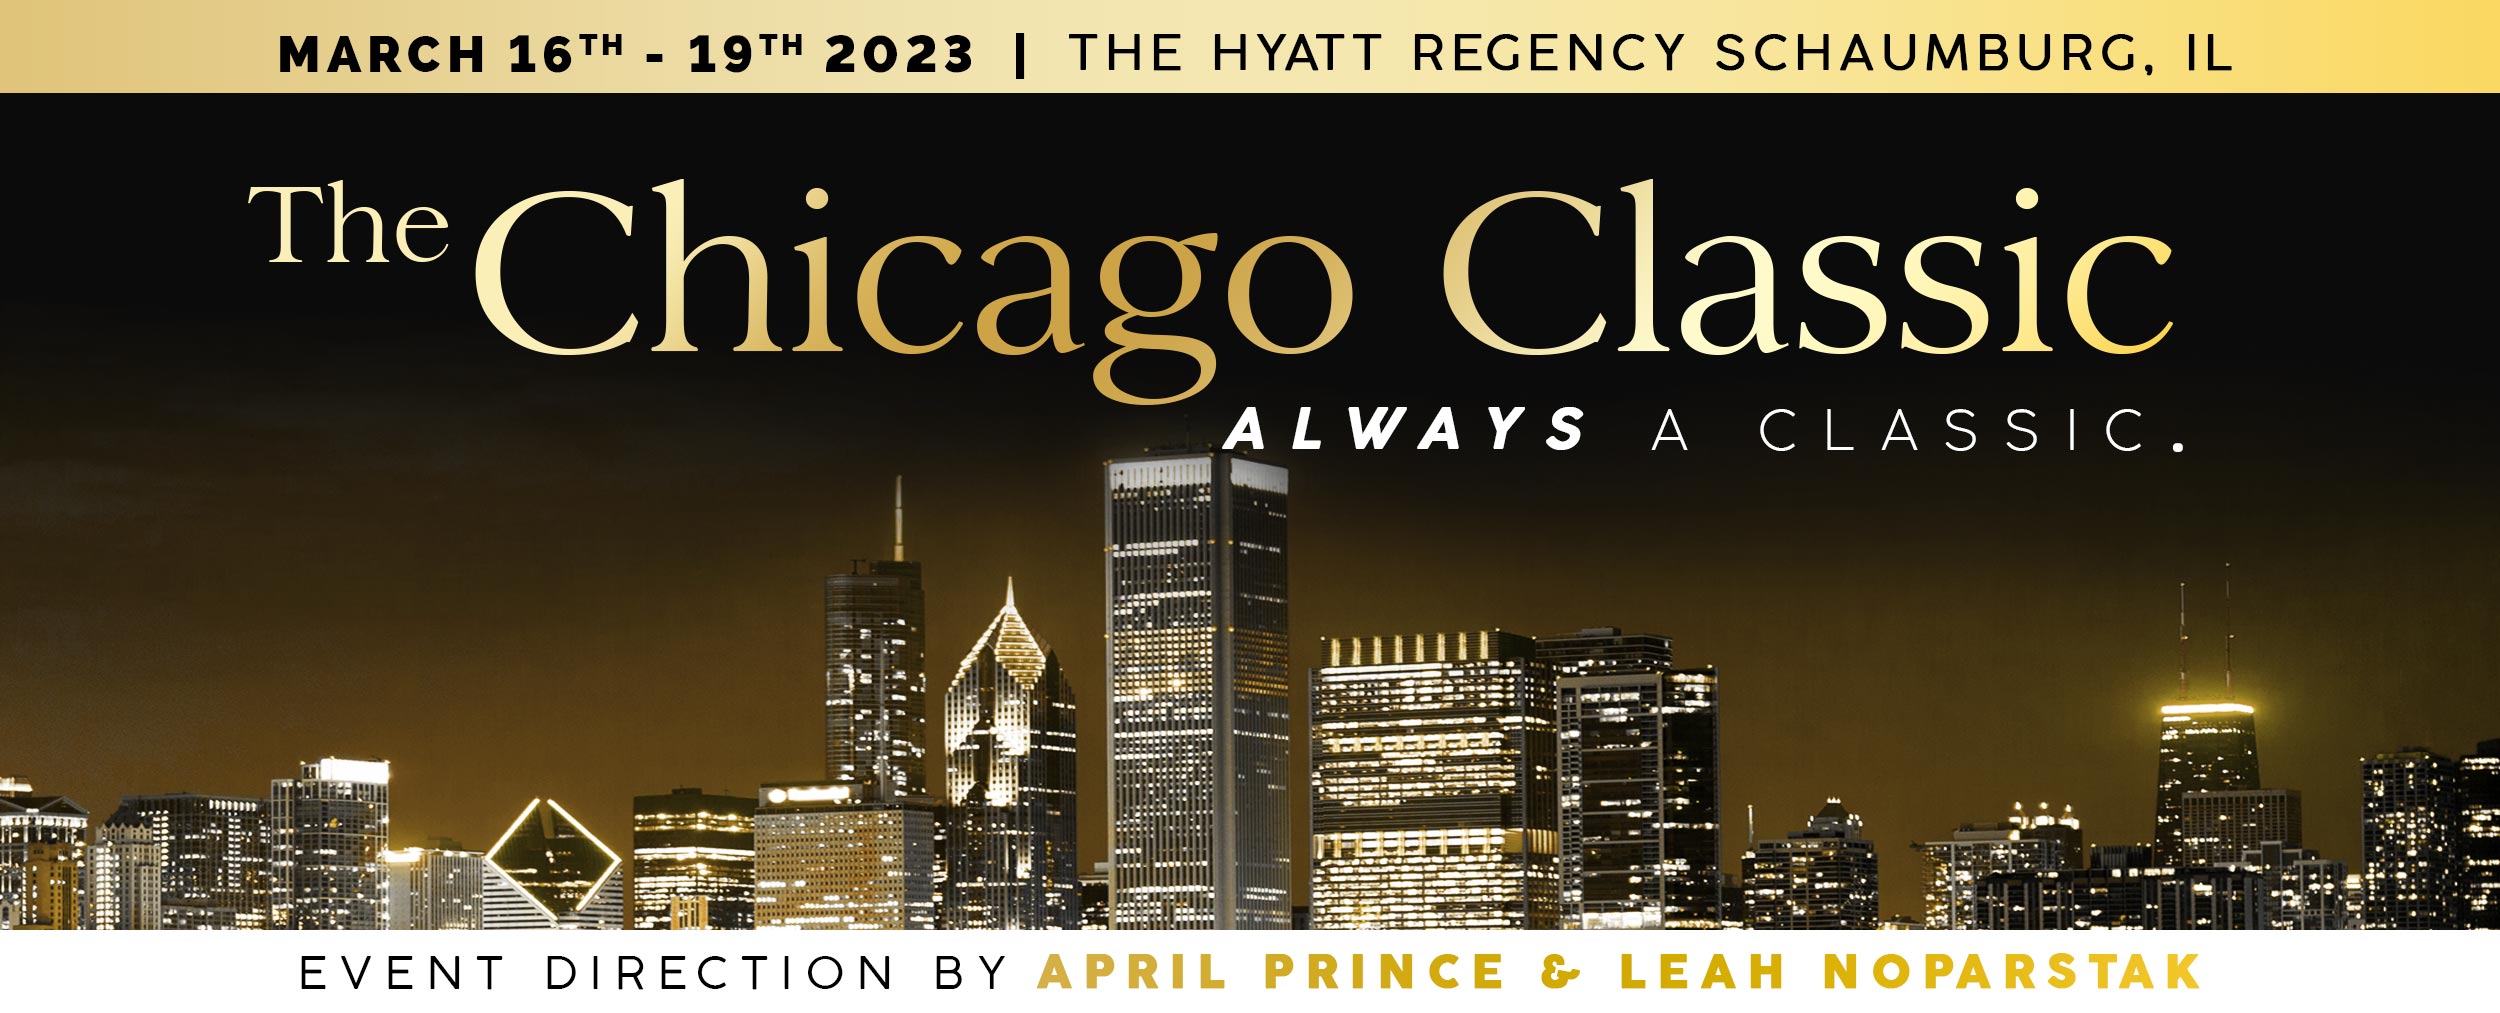 The Chicago Classic – Always a Classic